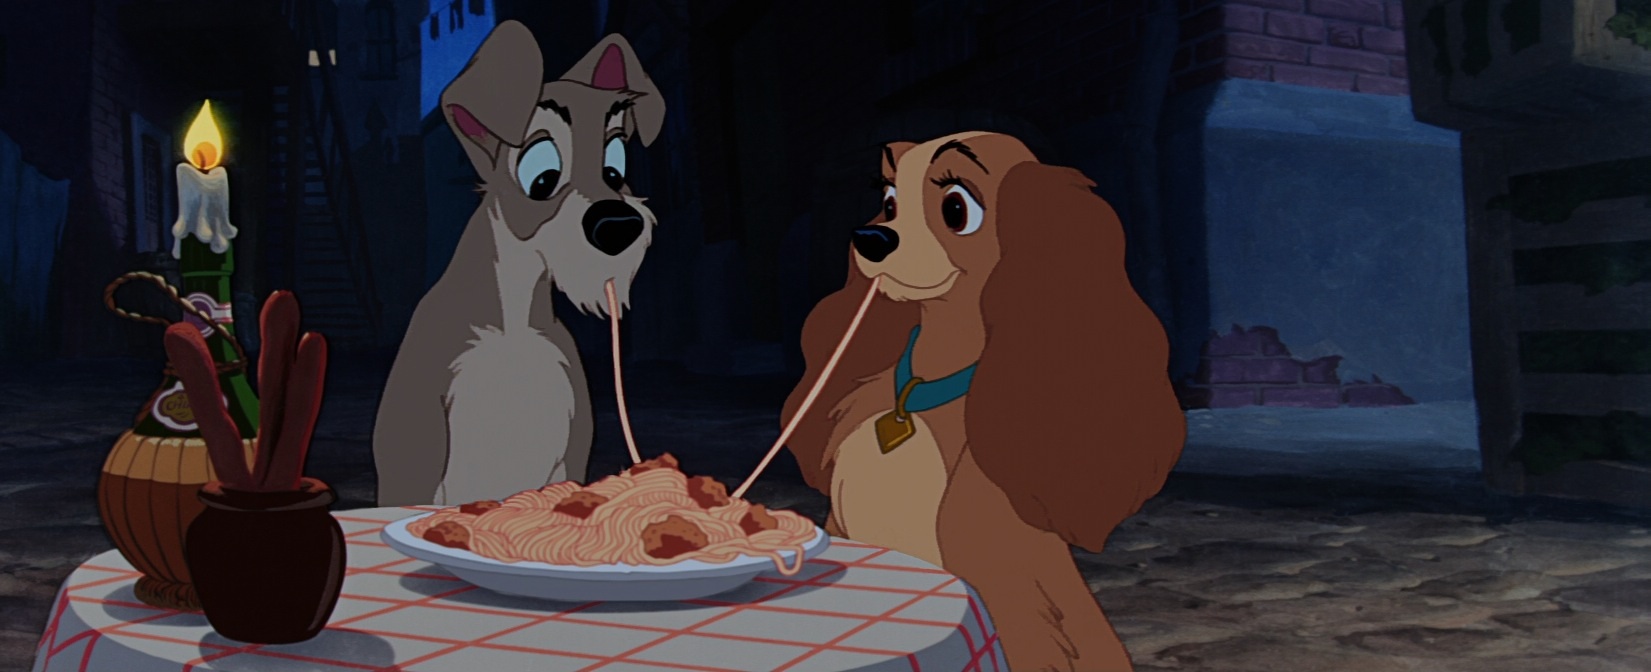 Zavvi is releasing the Lady and the Tramp Blu-ray as a SteelBook